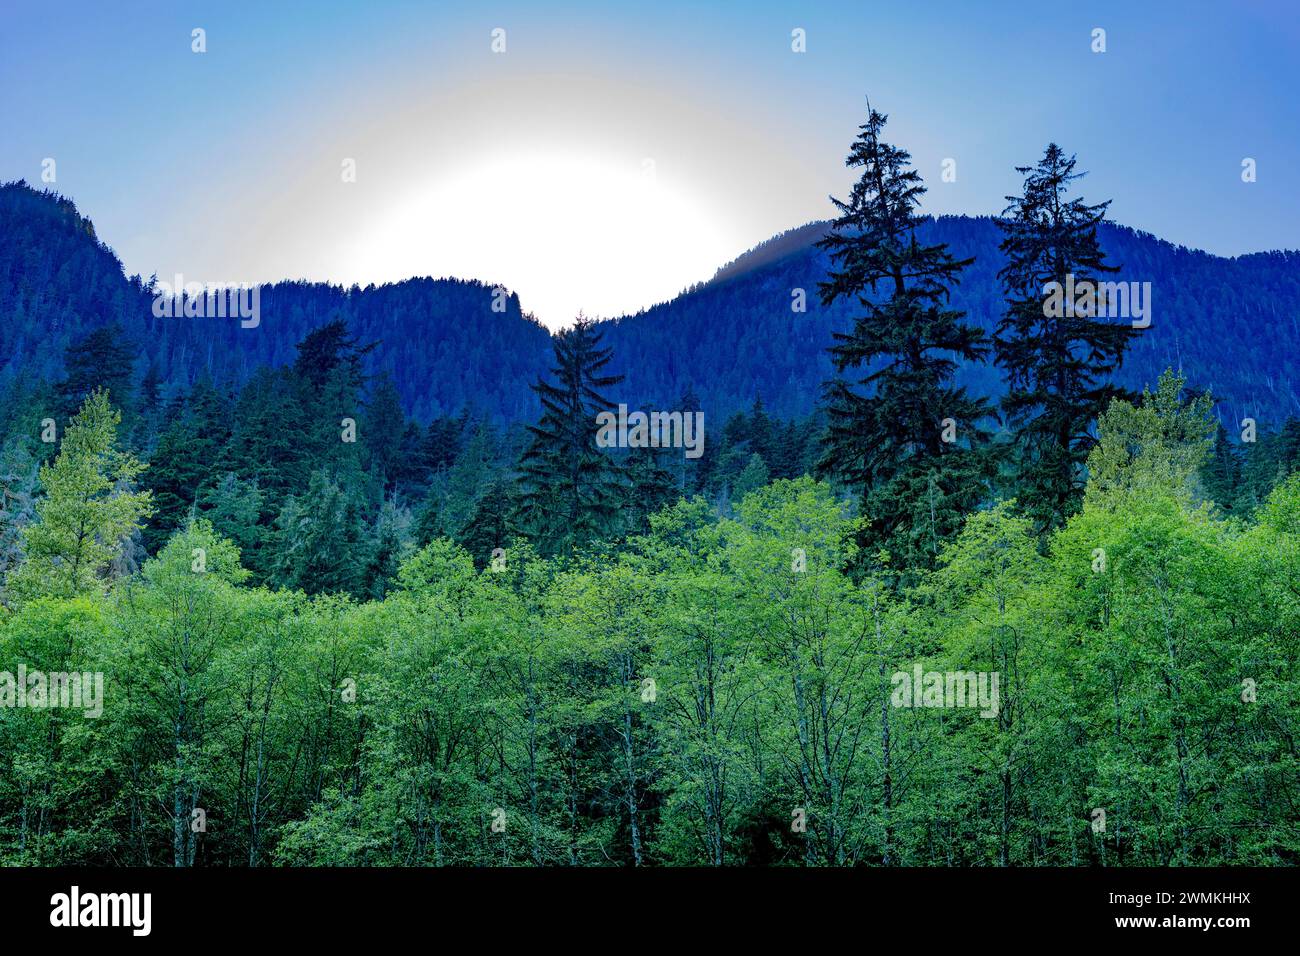 A bright, glowing sun behind blue, silhouetted mountains with a green, mixed forest in the foreground at Cedars Mill Trail in Lynn Valley Canyon Stock Photo